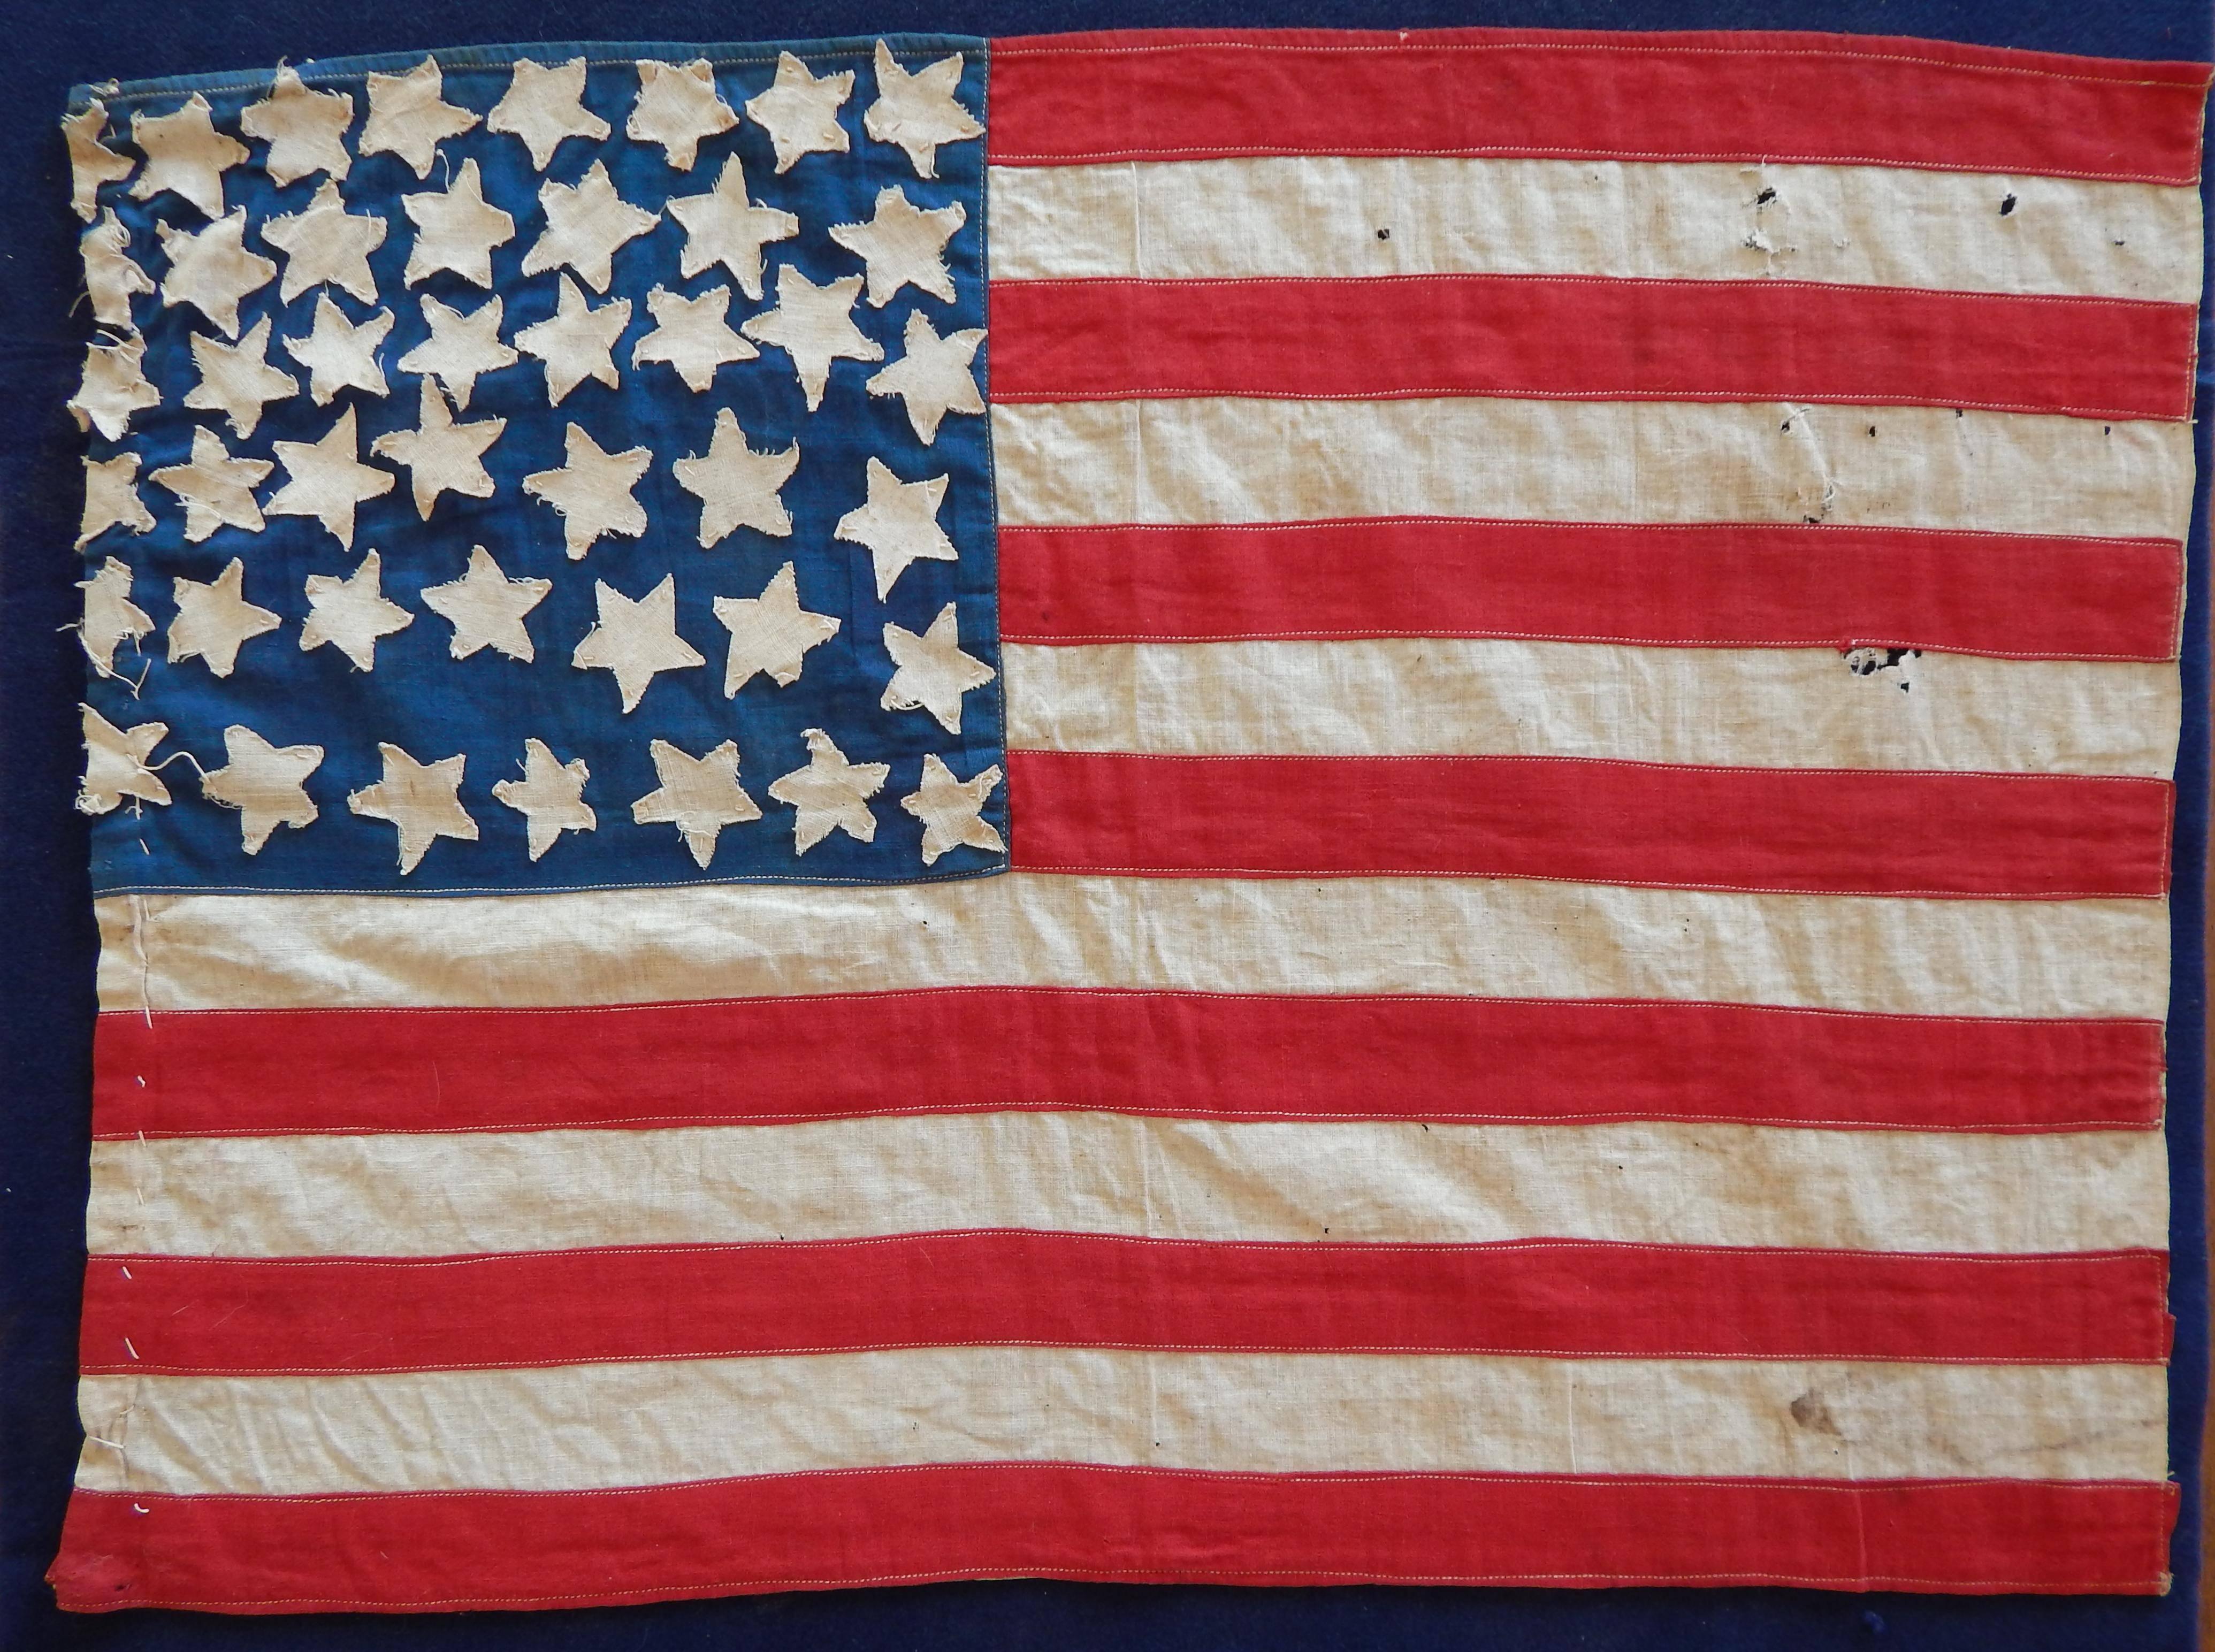 Wonderful bit of Americana.
Handmade Folk Art American flag with 44 Stars.
Hand-stitched edge and stars with machine stitched stripes,
circa 1890s
Our flag bore 44 stars beginning July 3, 1890 with the admission
of Wyoming till 1896 when Utah